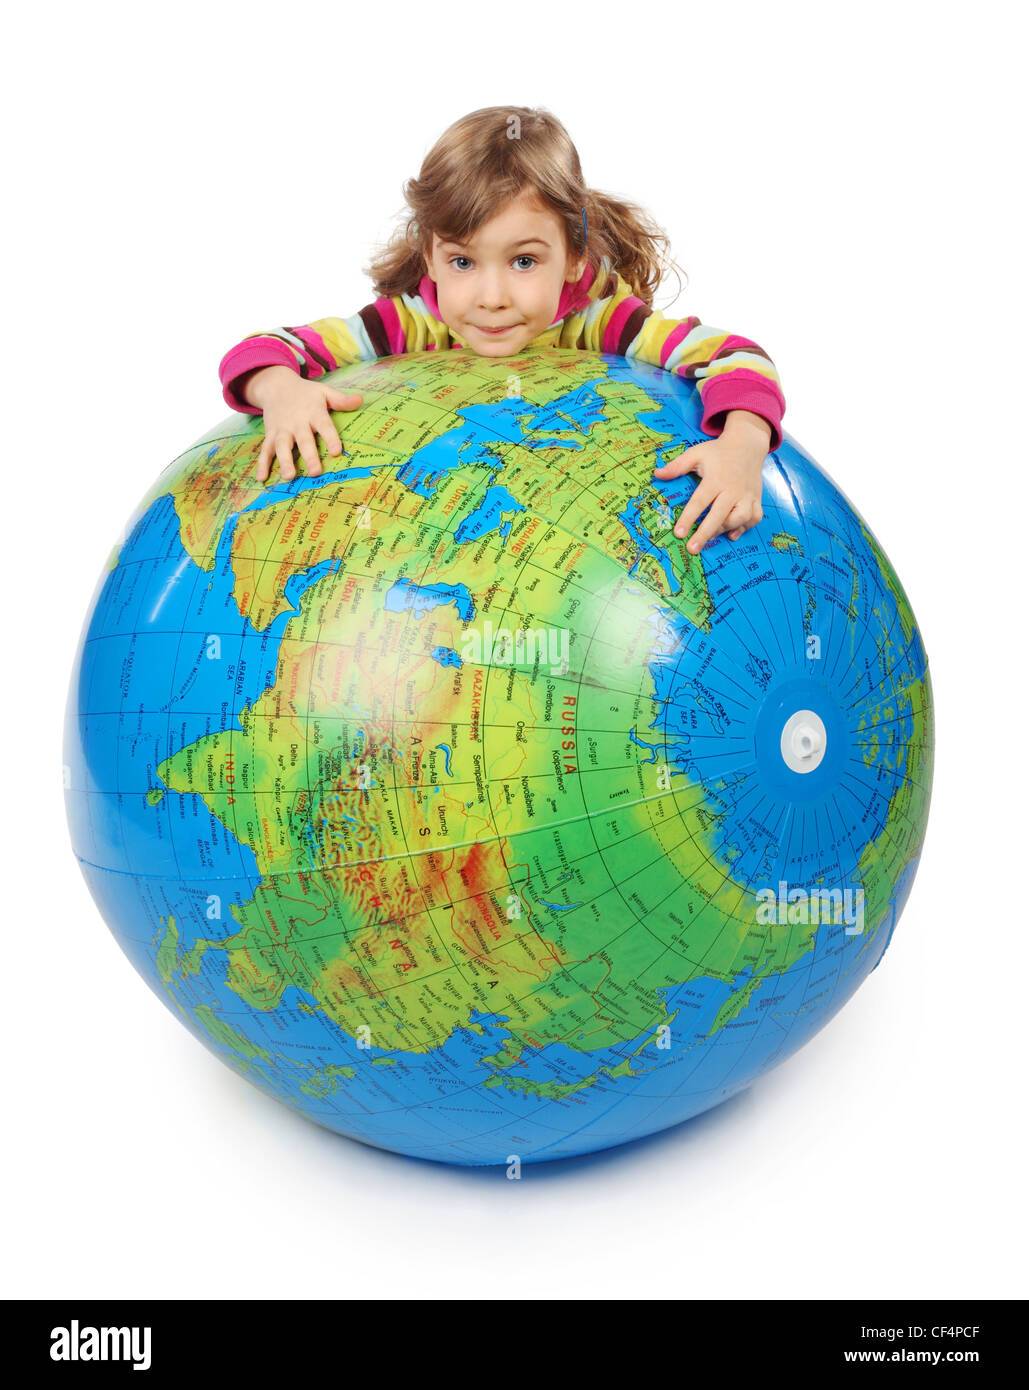 little girl look out of big inflatable globe and embracing it, isolated on white Stock Photo